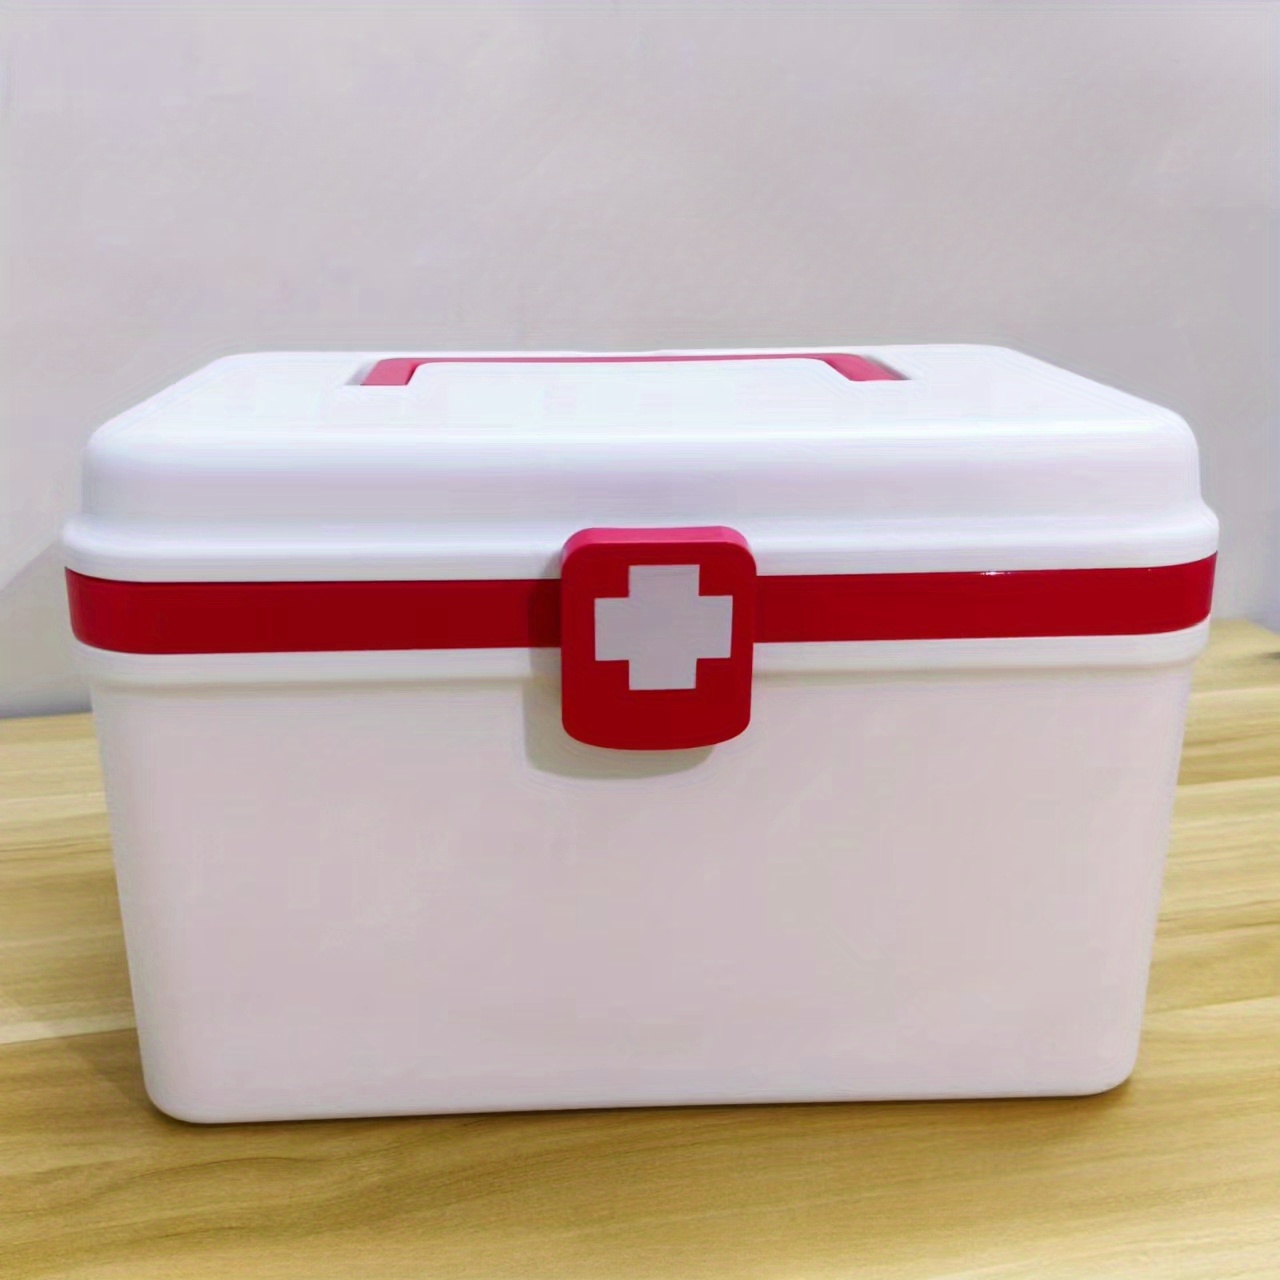 Home Care First Aid Kit Portable Large Medicine Box Household